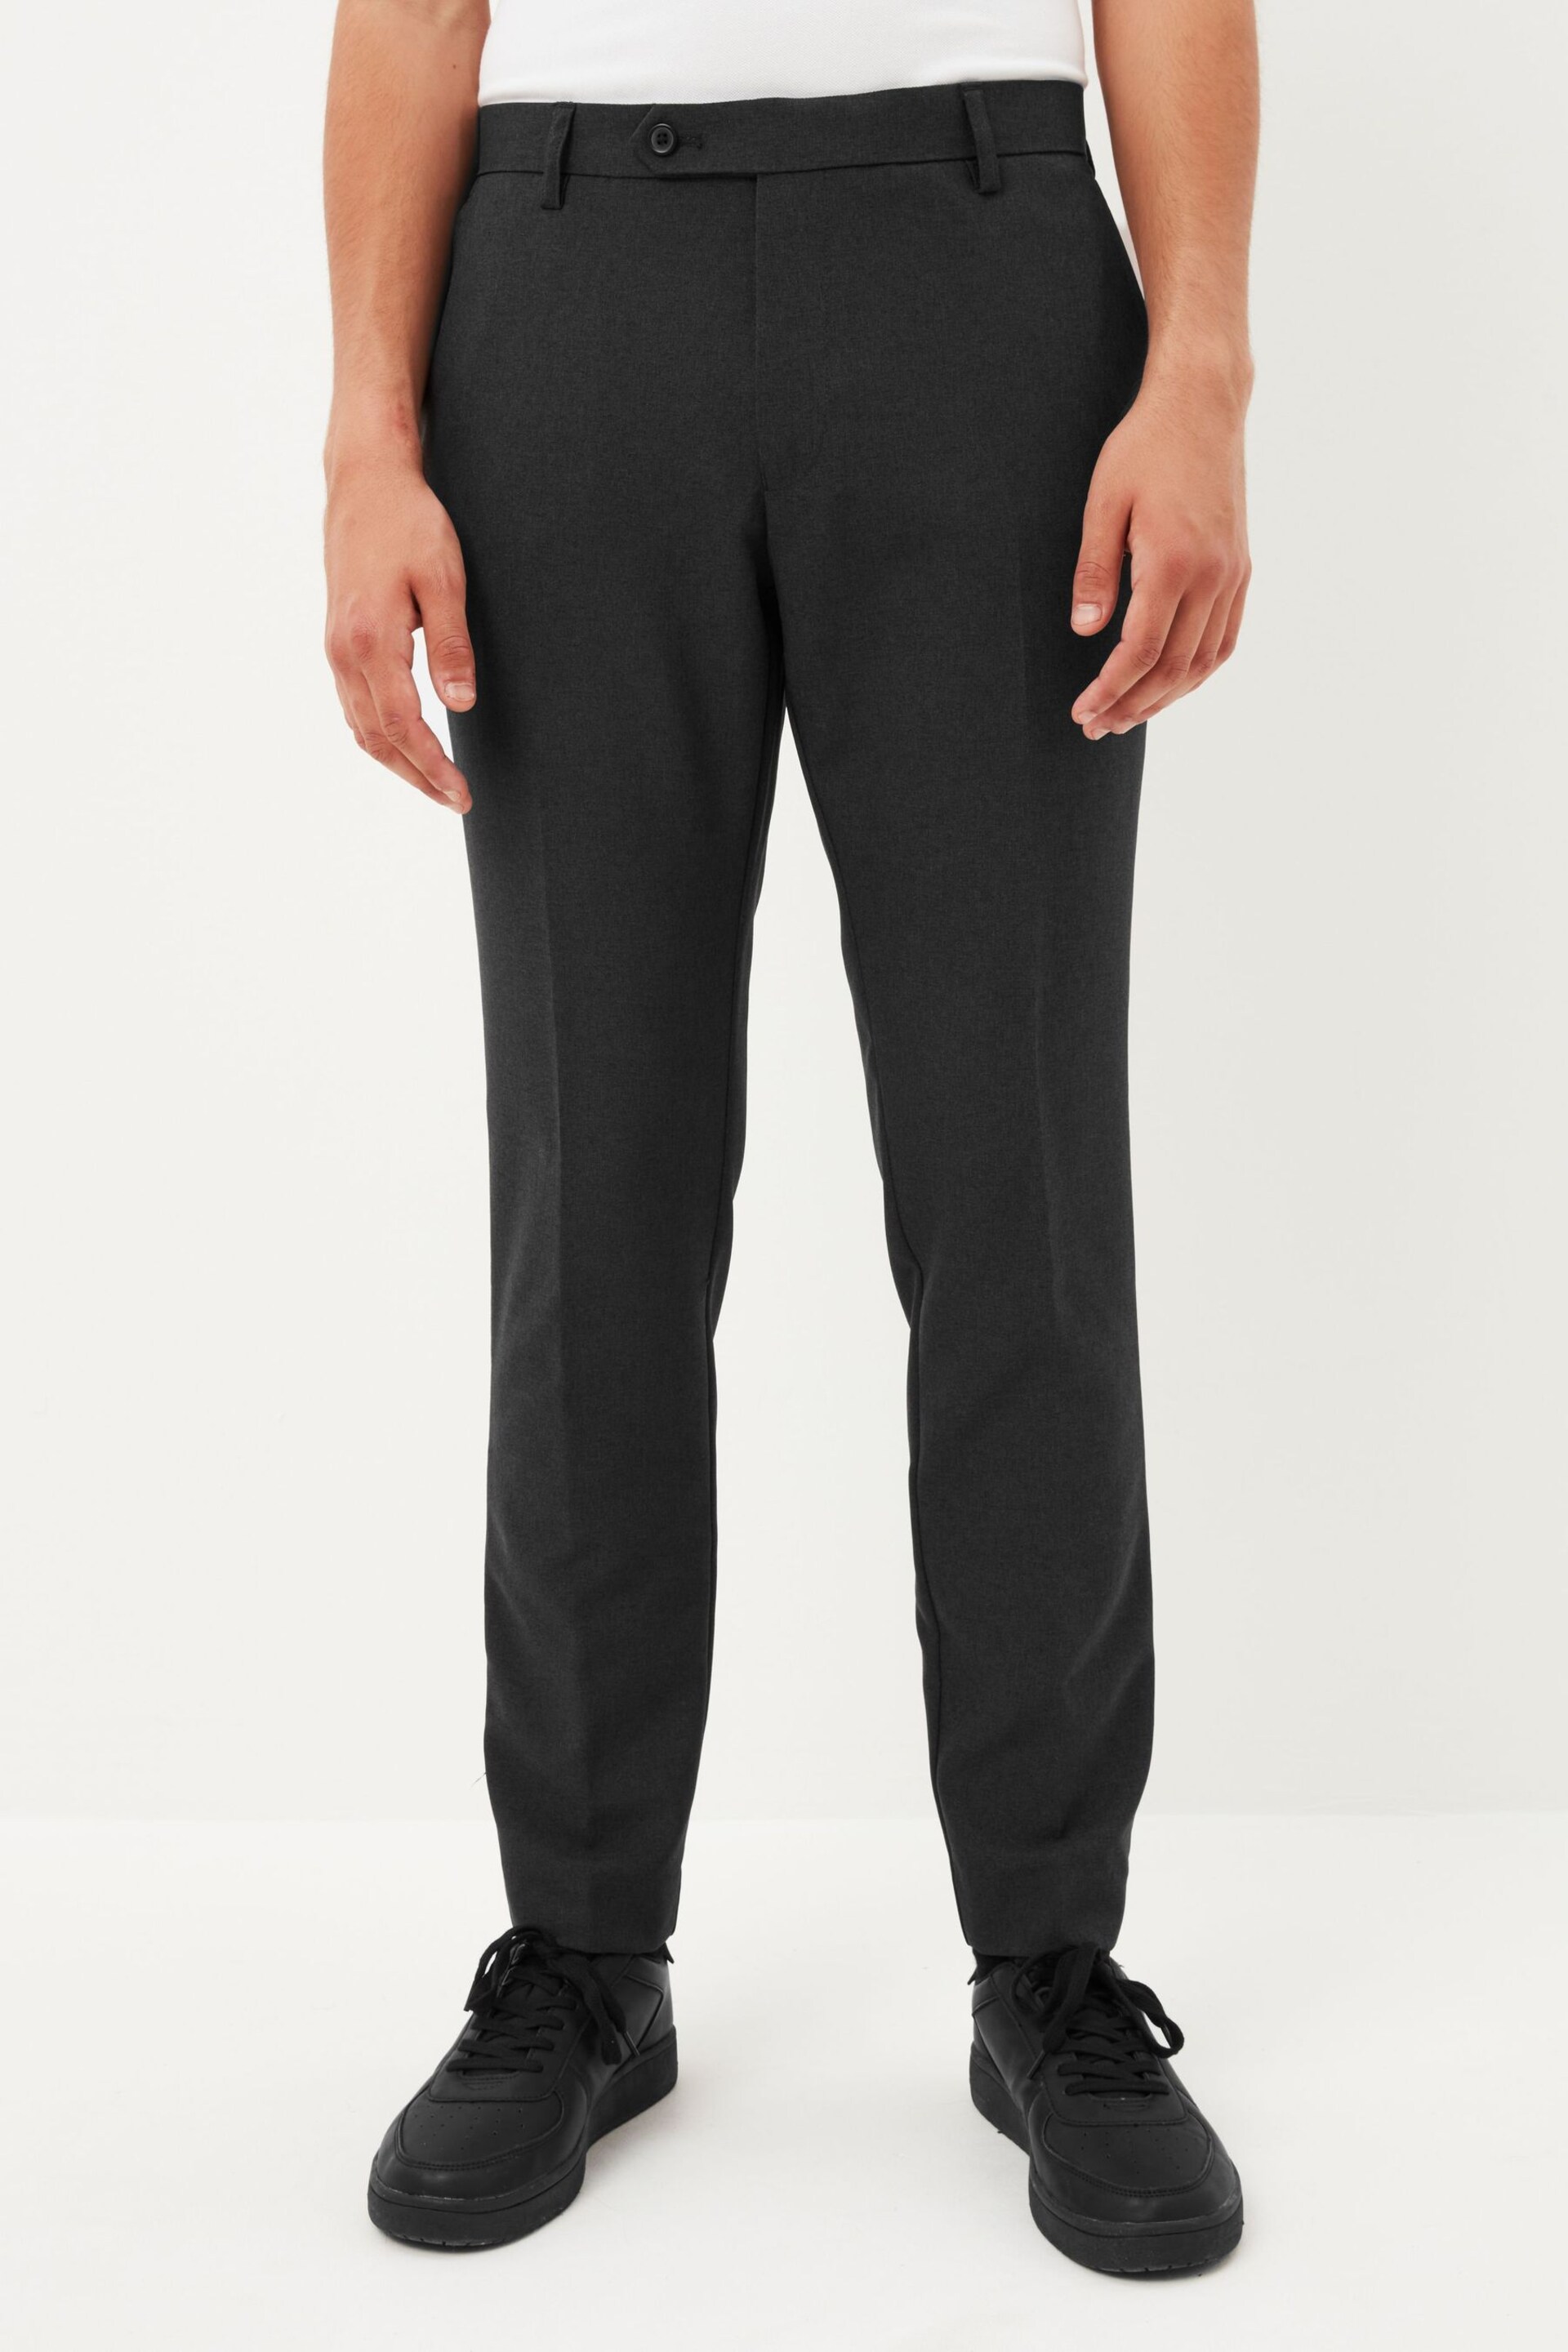 Charcoal Grey Skinny Machine Washable Plain Front Smart Trousers - Image 8 of 8